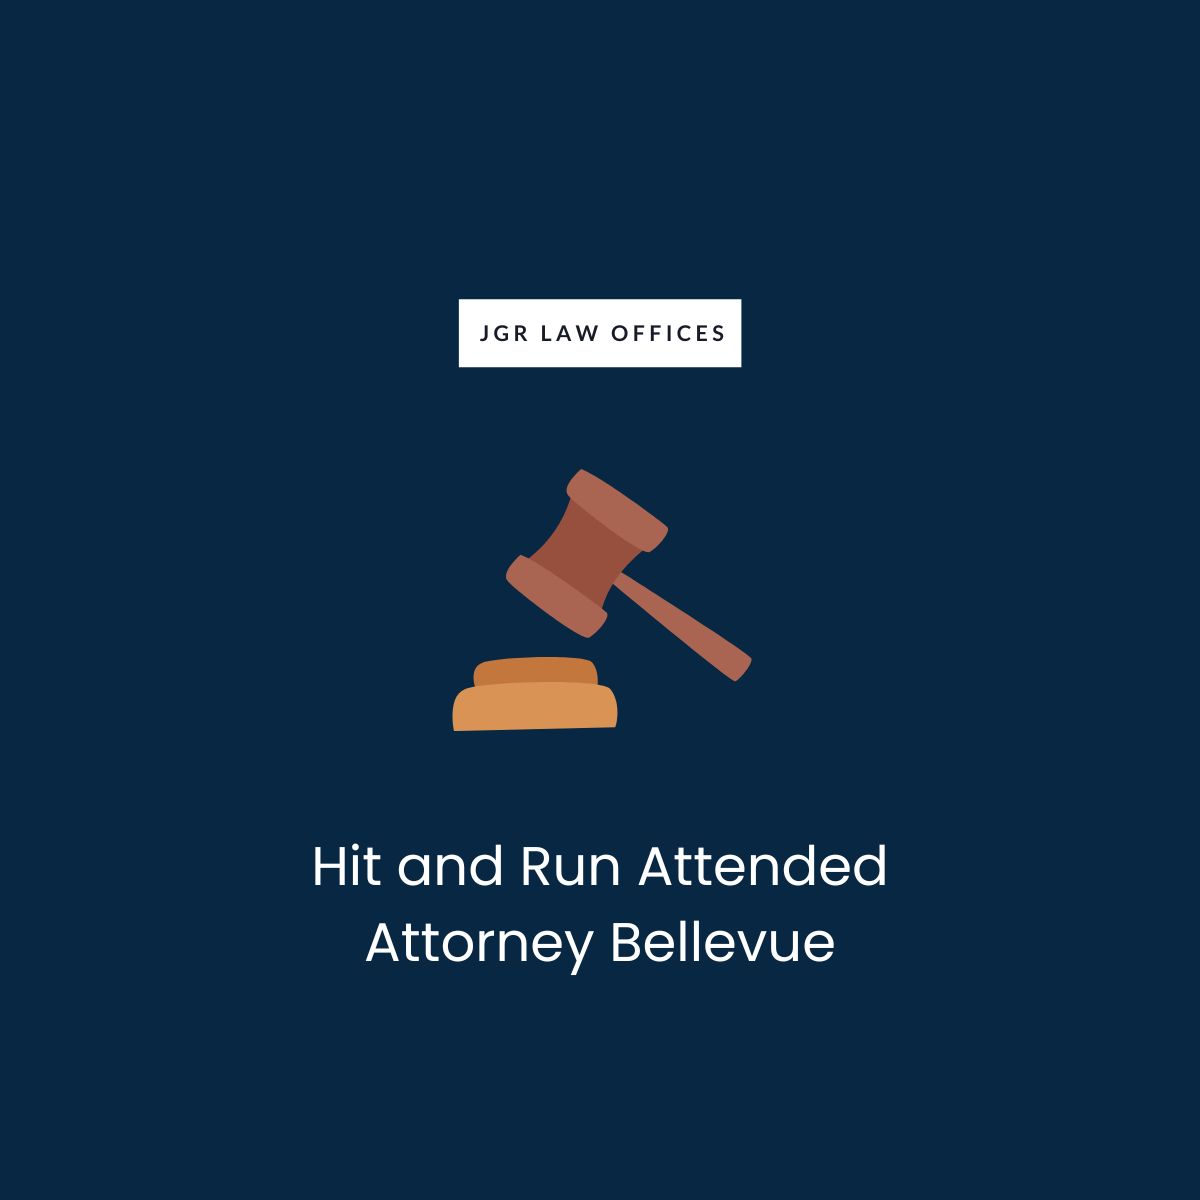 Hit and Run Attended Attorney Bellevue